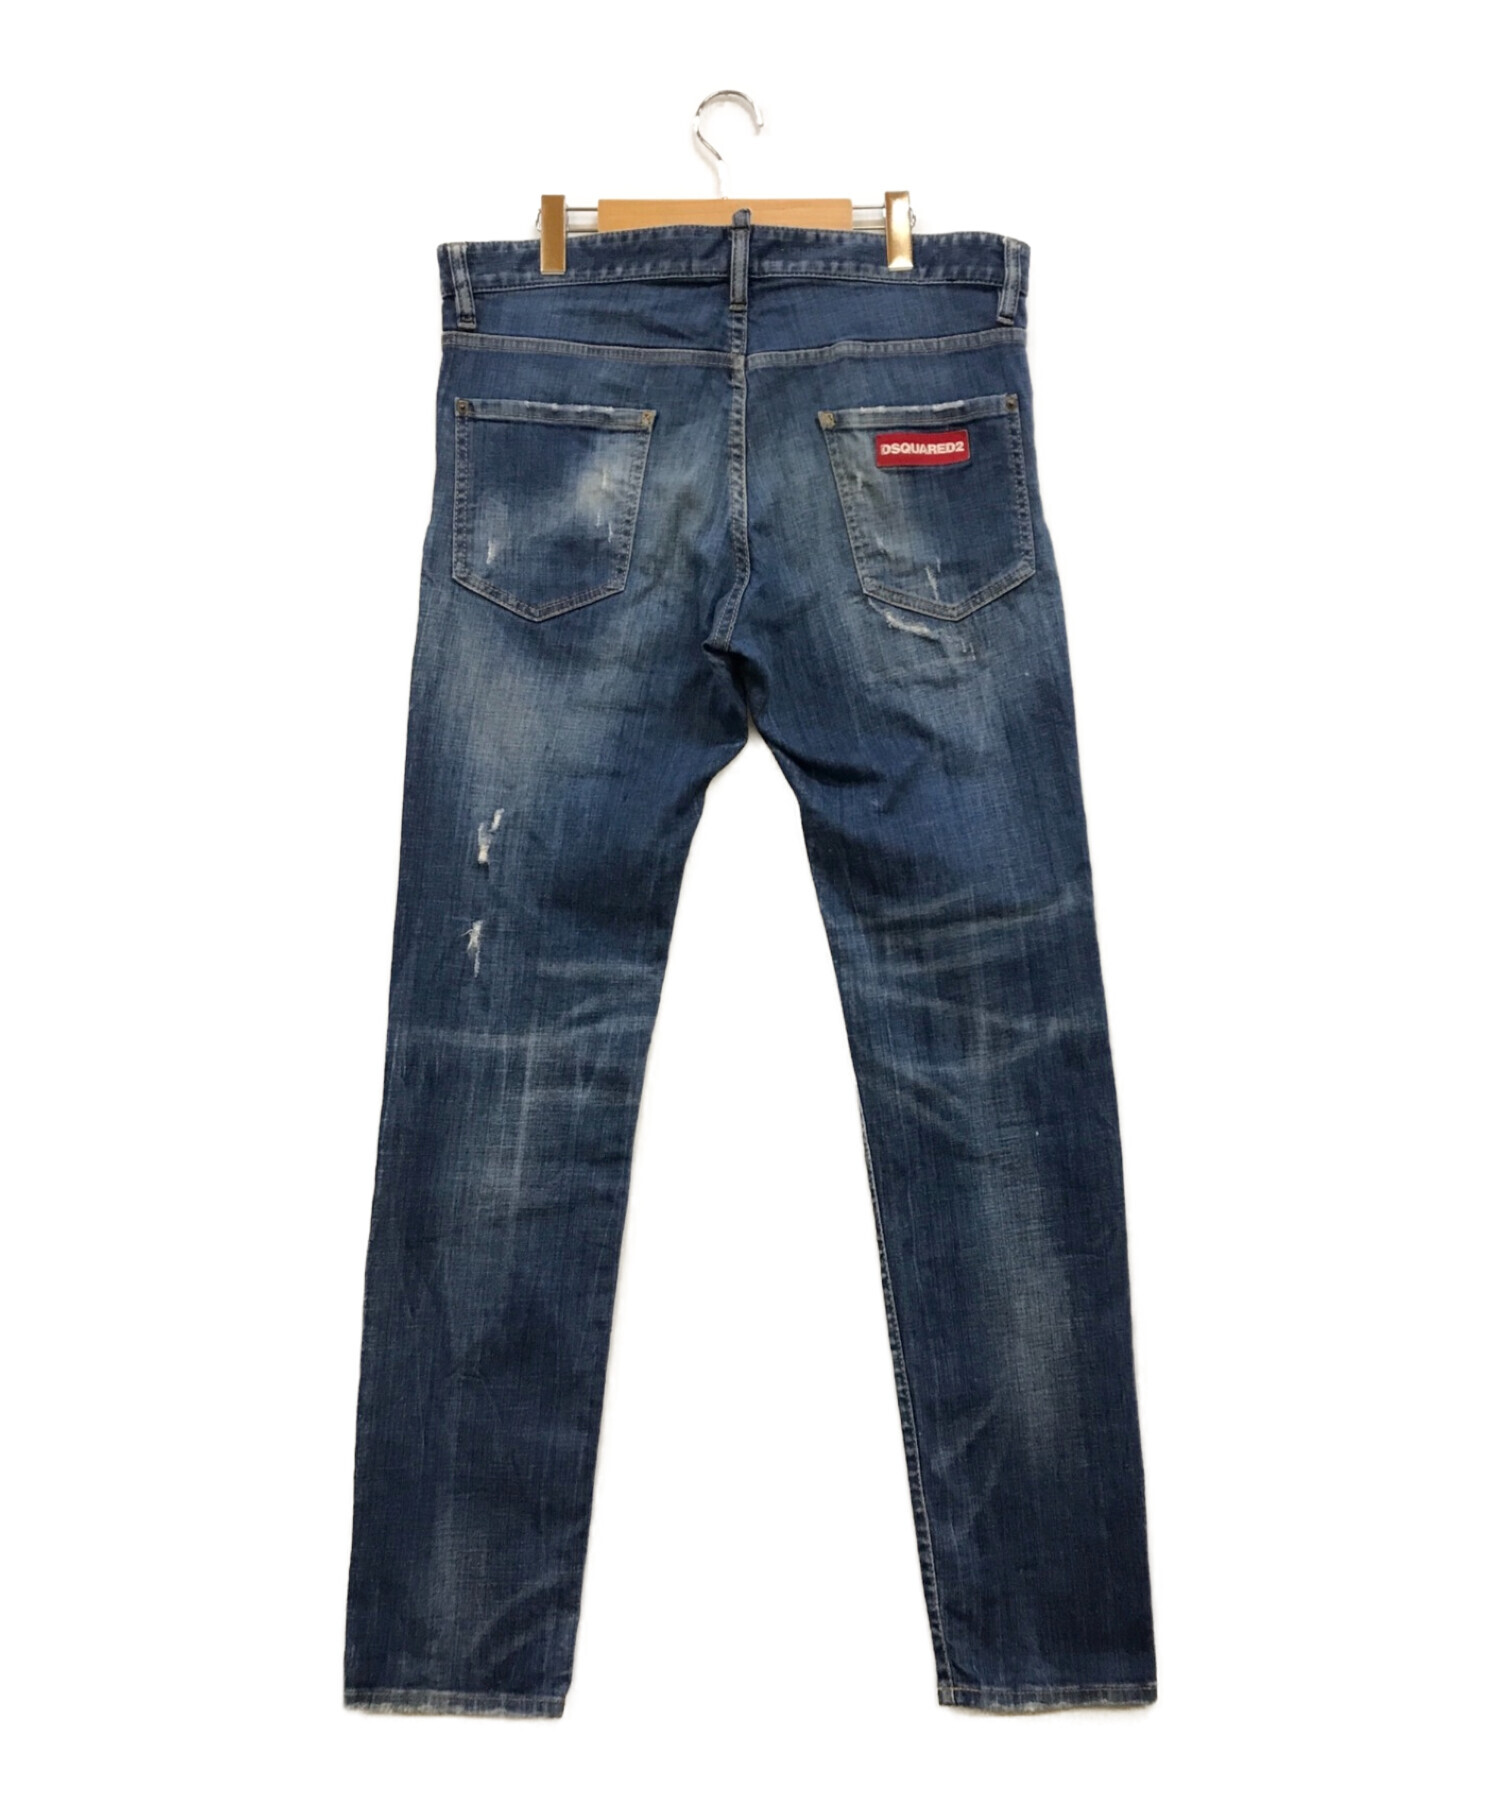 DSQUARED2 ディースクエアード COOL GUY JEAN 52-